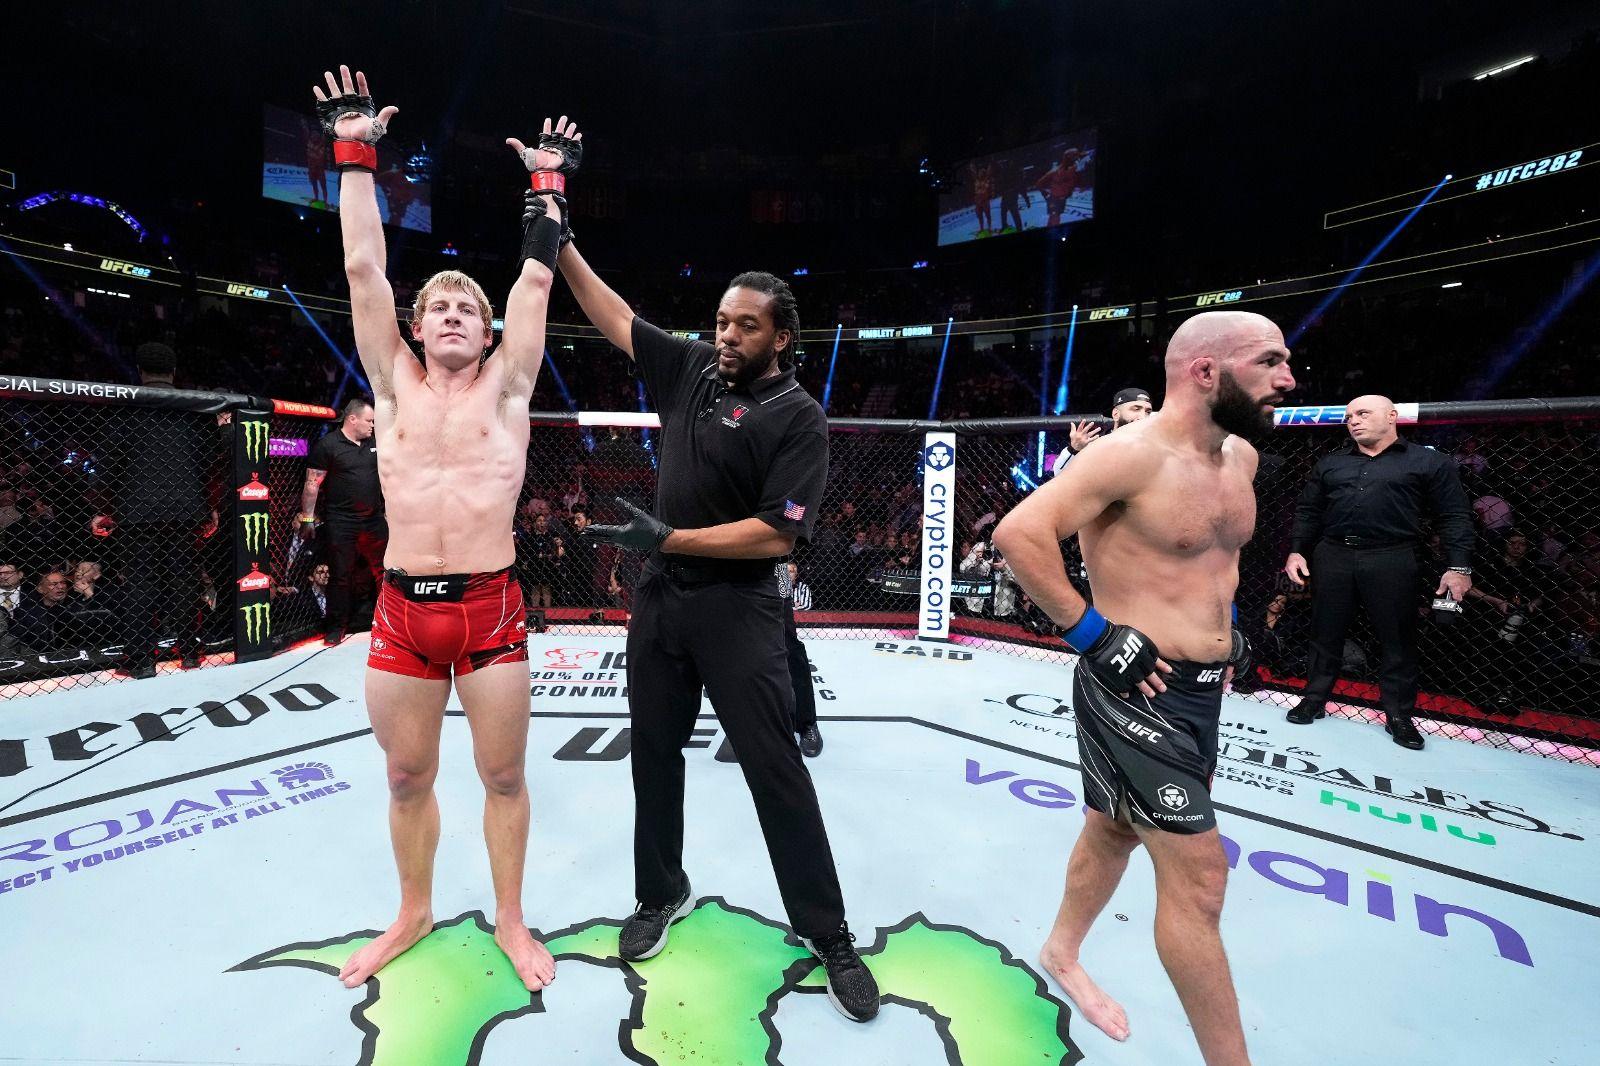 Paddy Pimblett with a controversial win against Jared Gordon during UFC282.